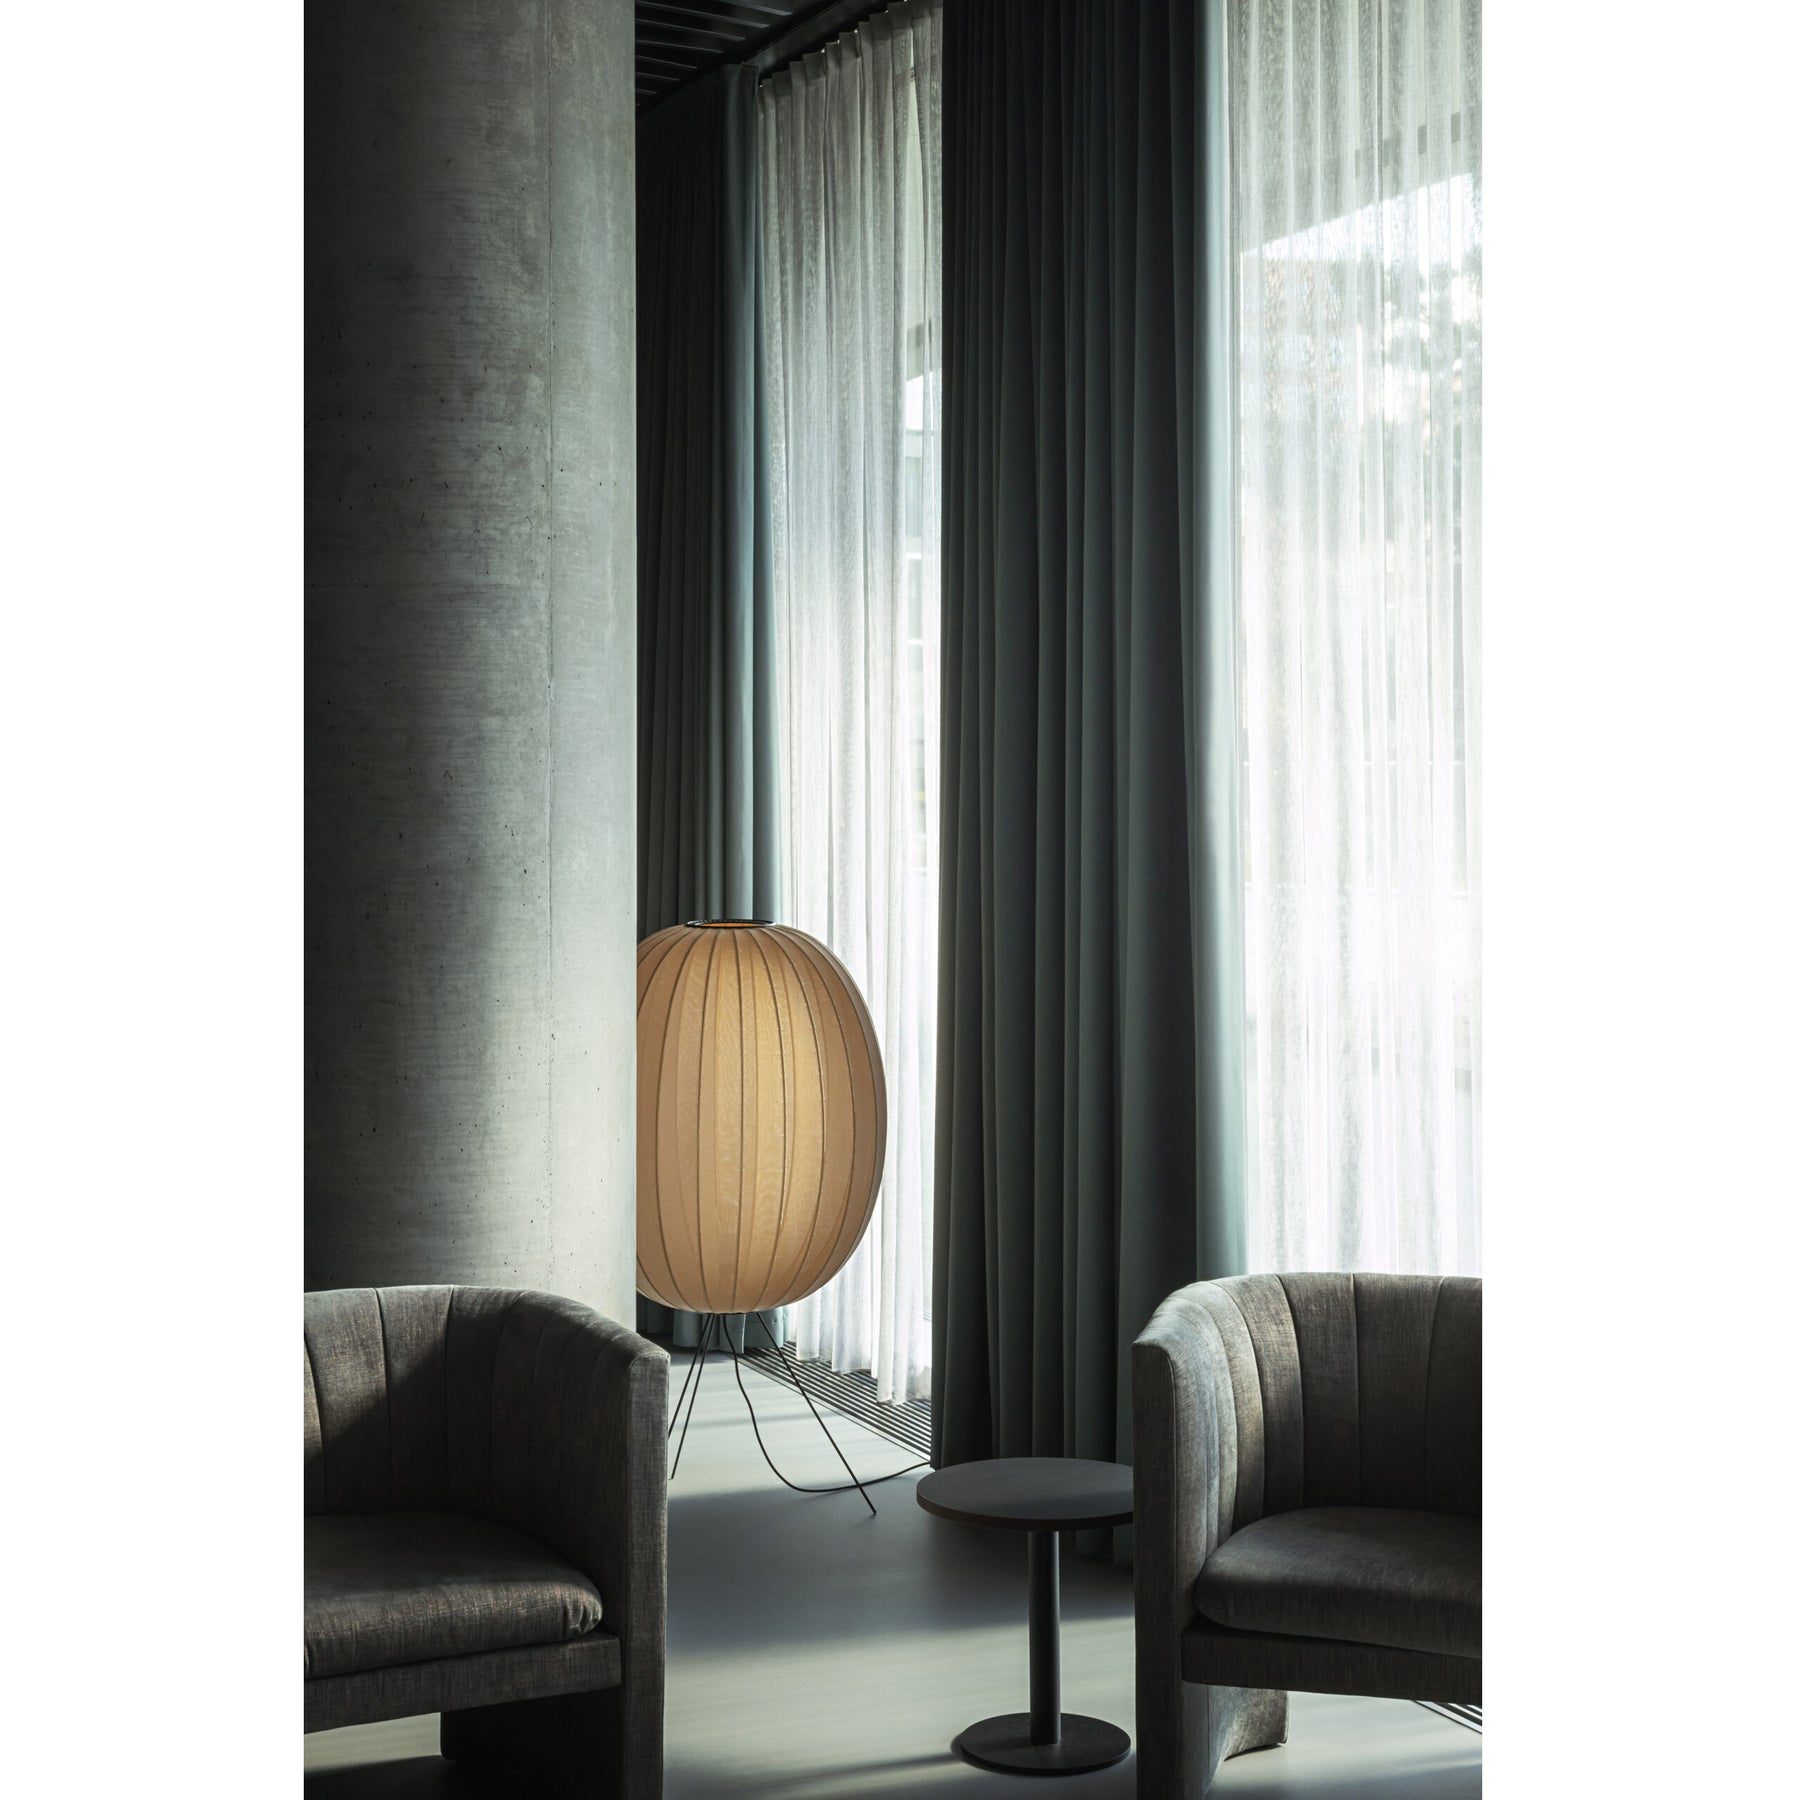 Made by Hand  Knit-Wit Medium Floor Lamp 65